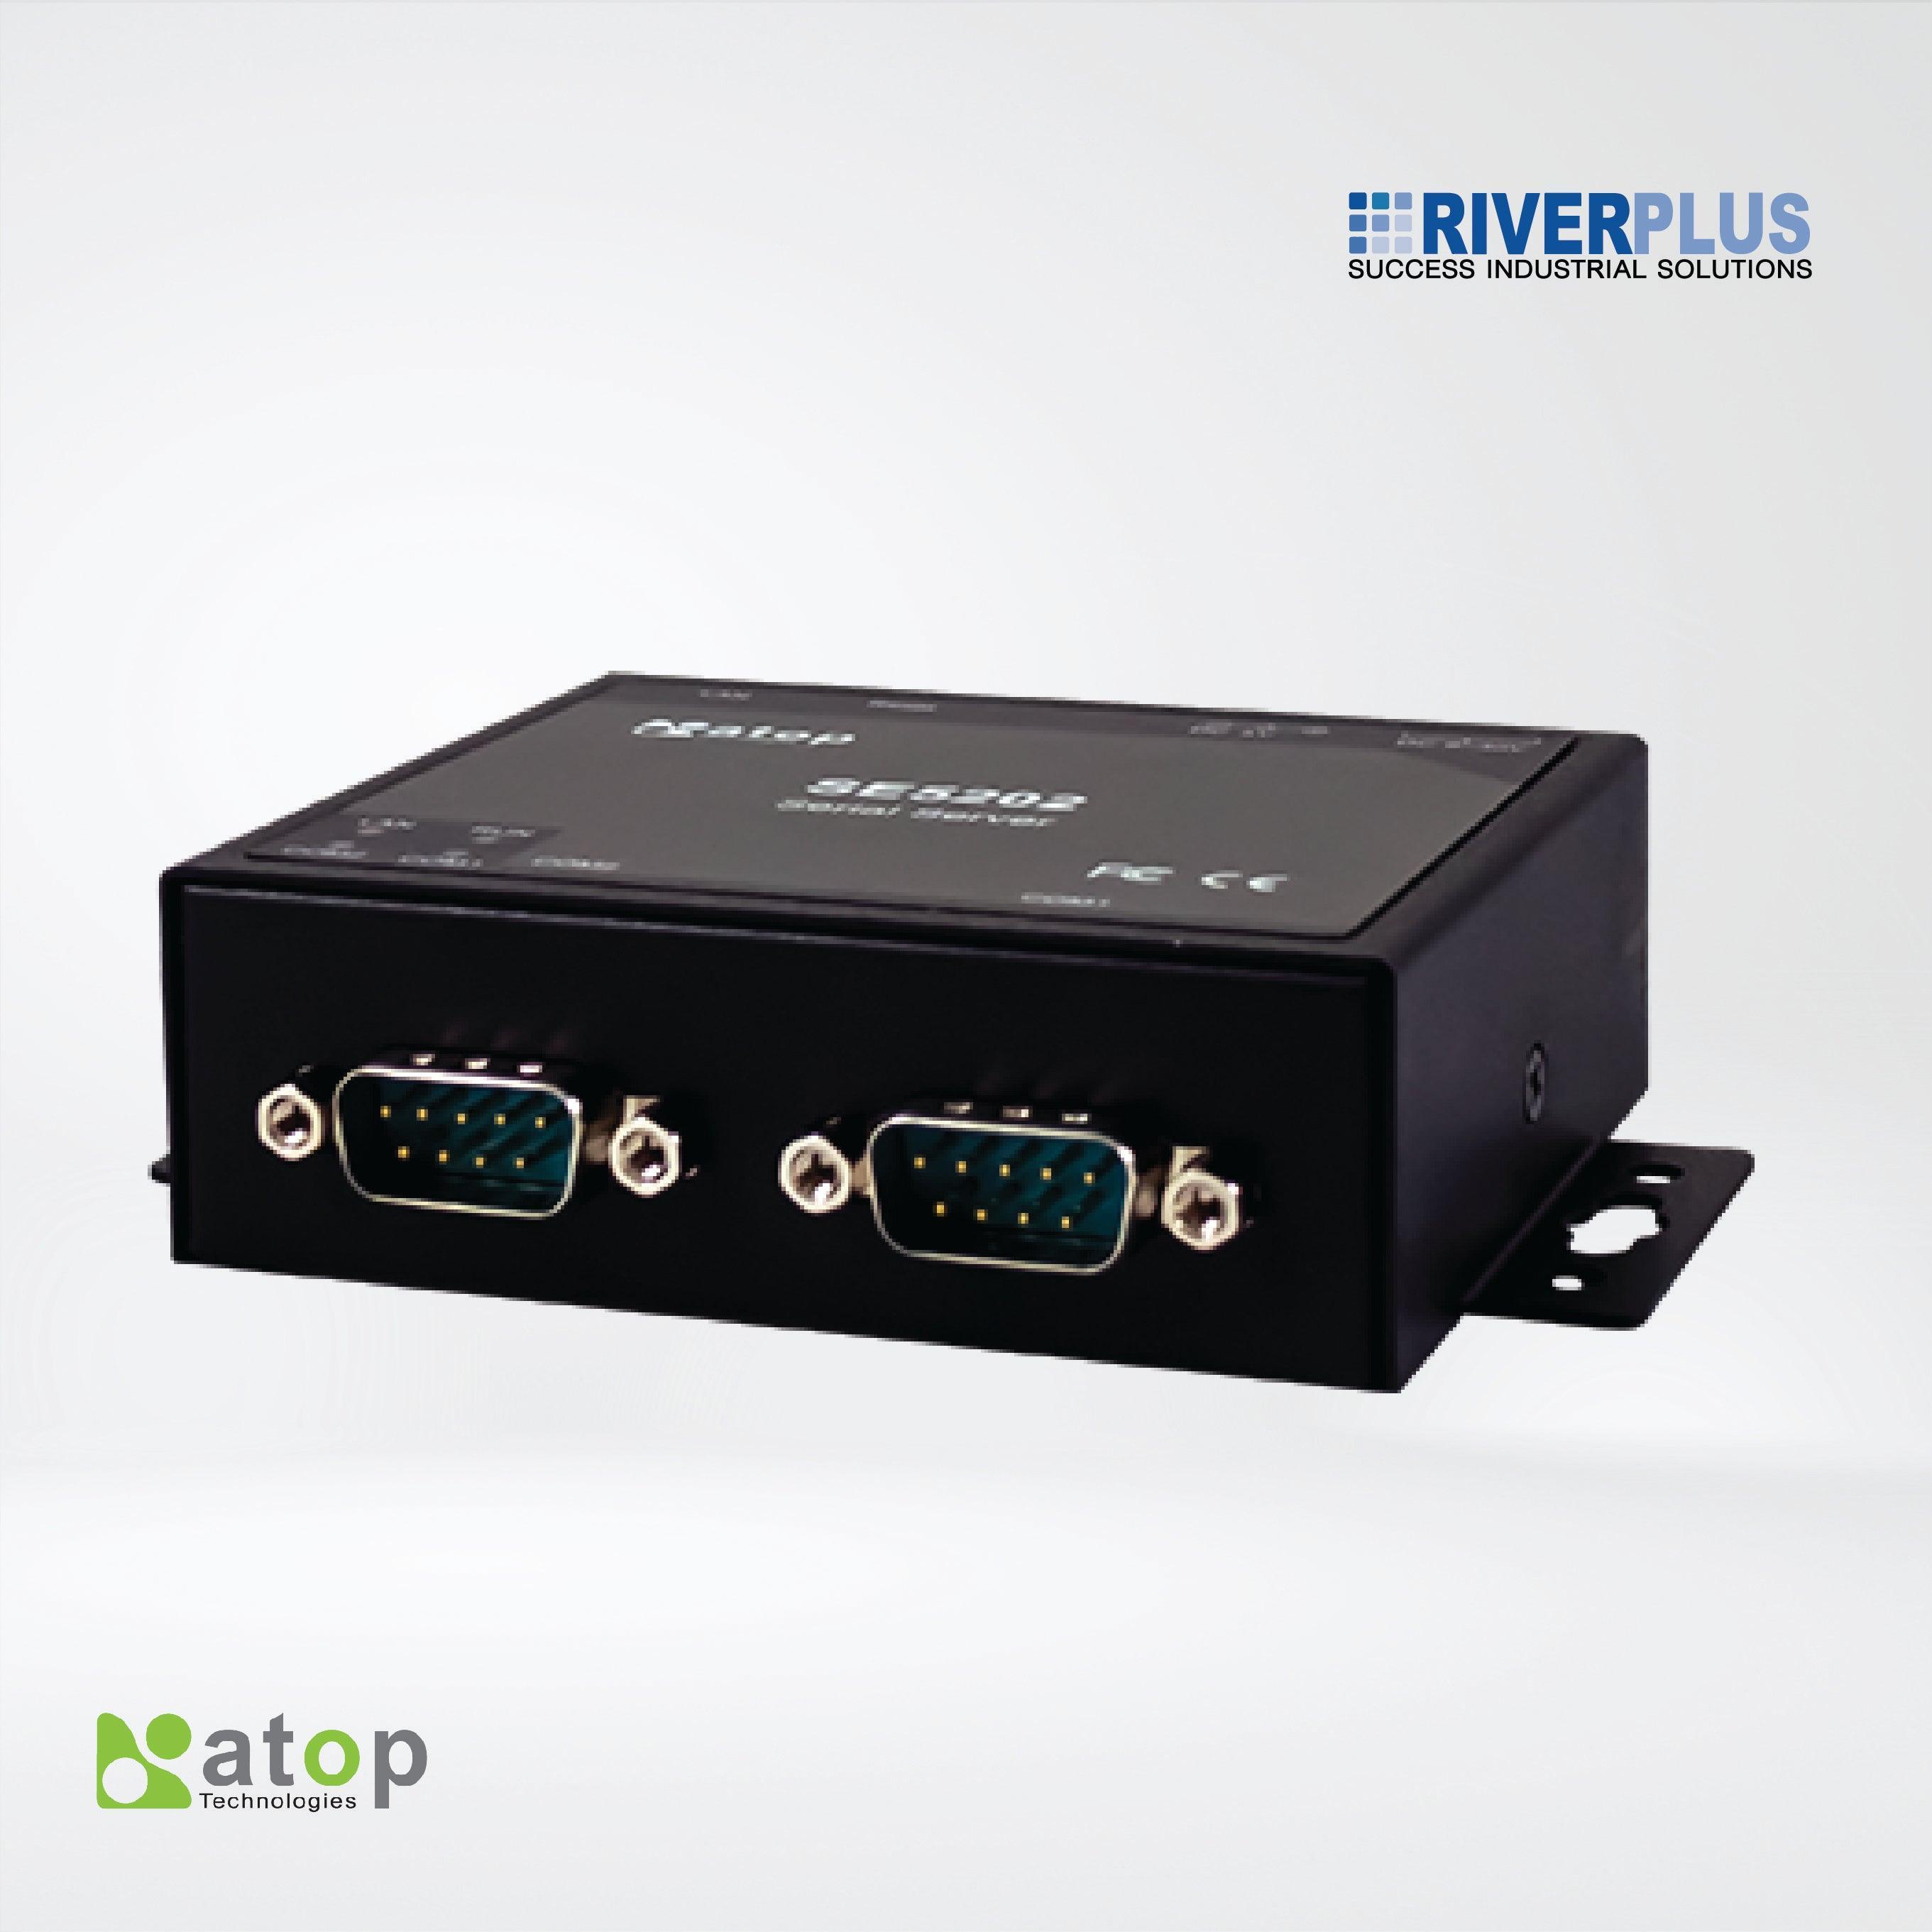 SE5202-TB Compact 2-Port Industrial Serial Device Server, Field-Mount - Riverplus